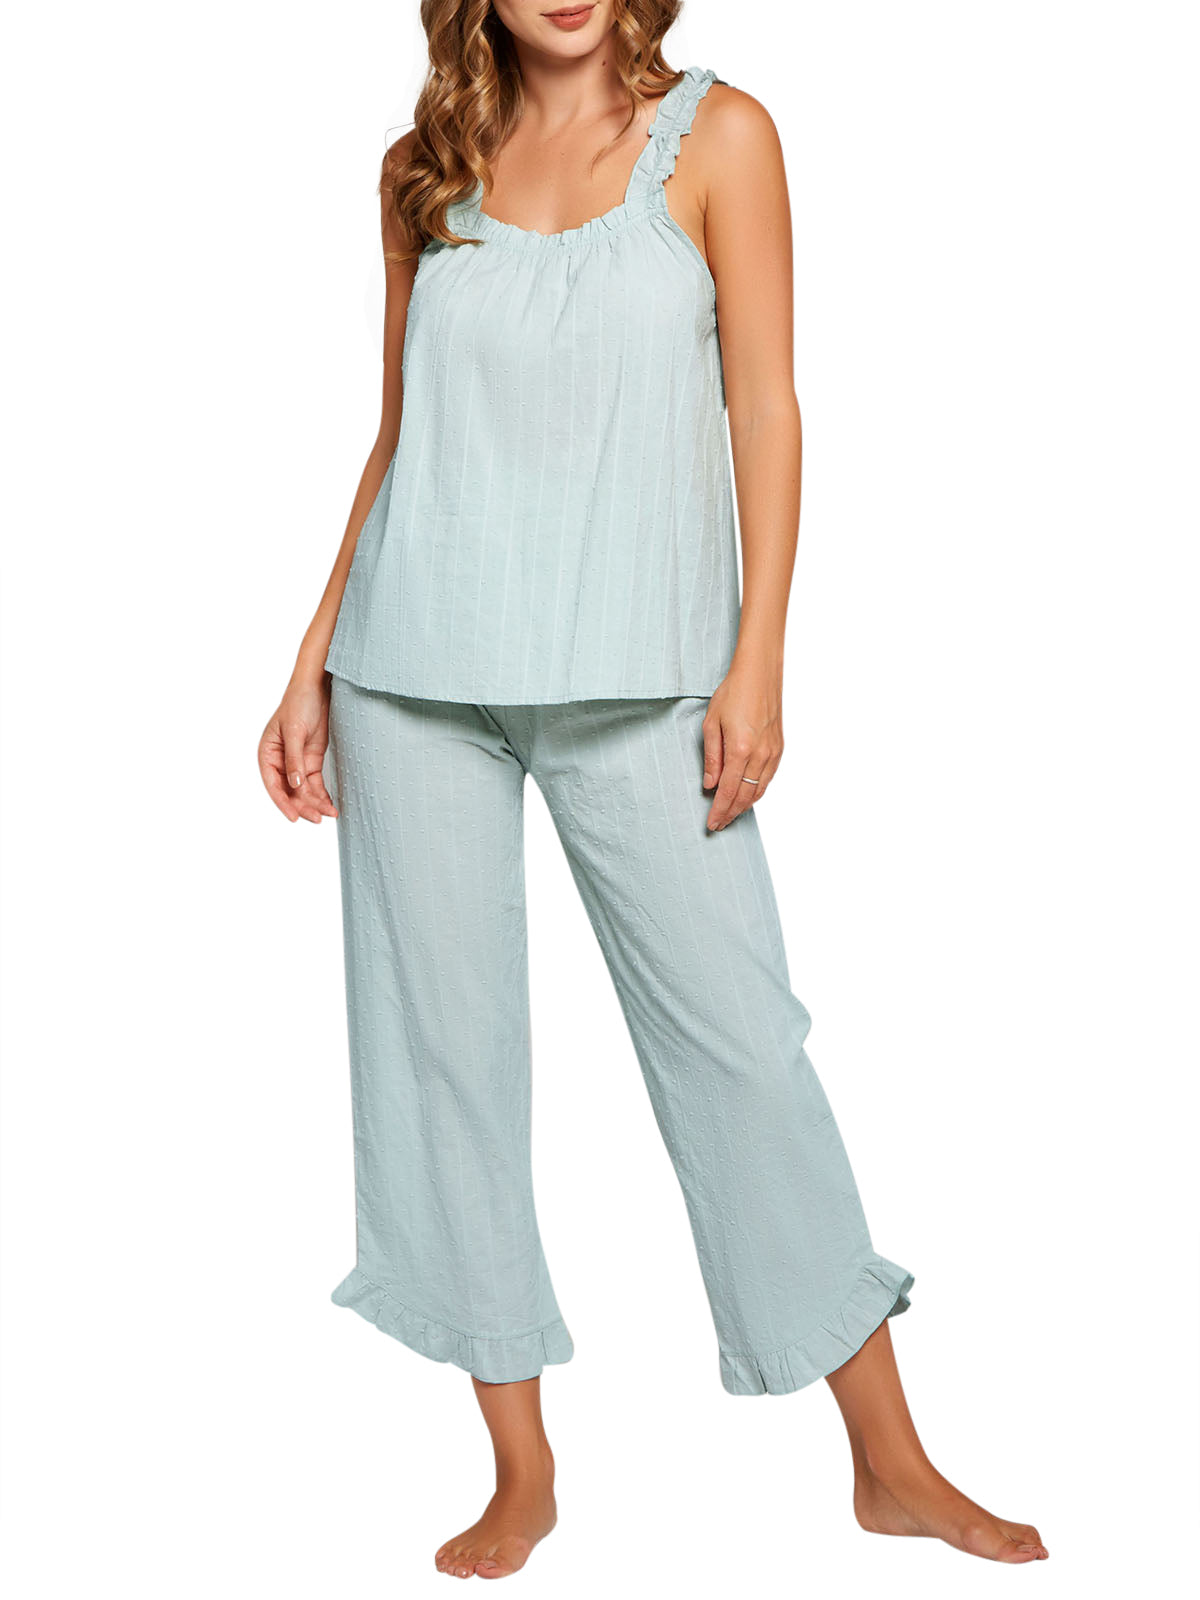 iCollection Claire Pajamas